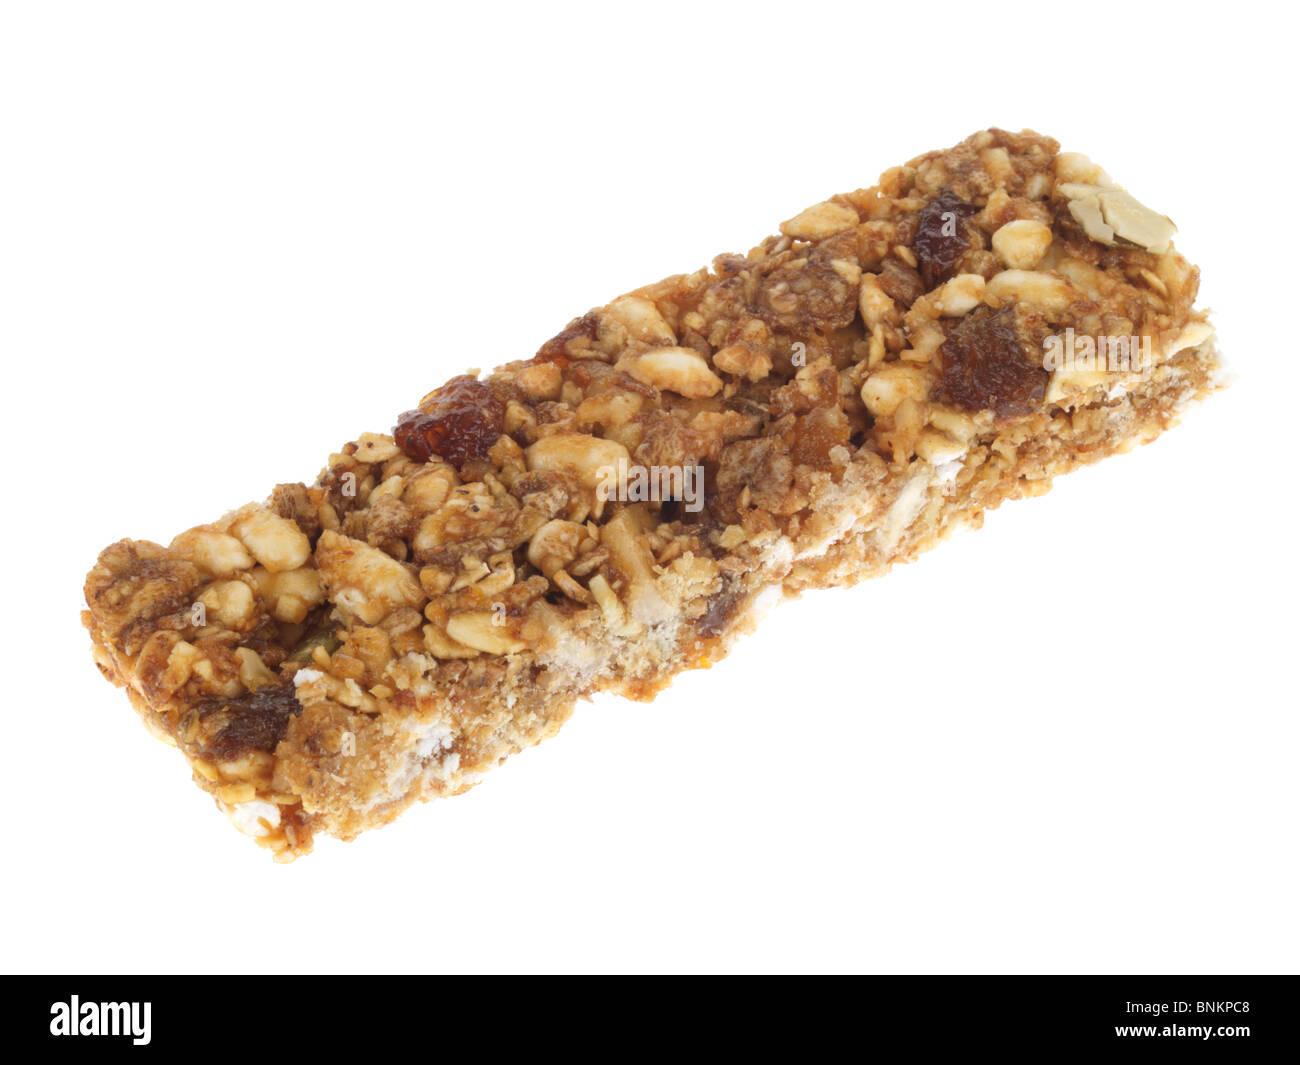 Fruit and Nut Cereal Bar Stock Photo